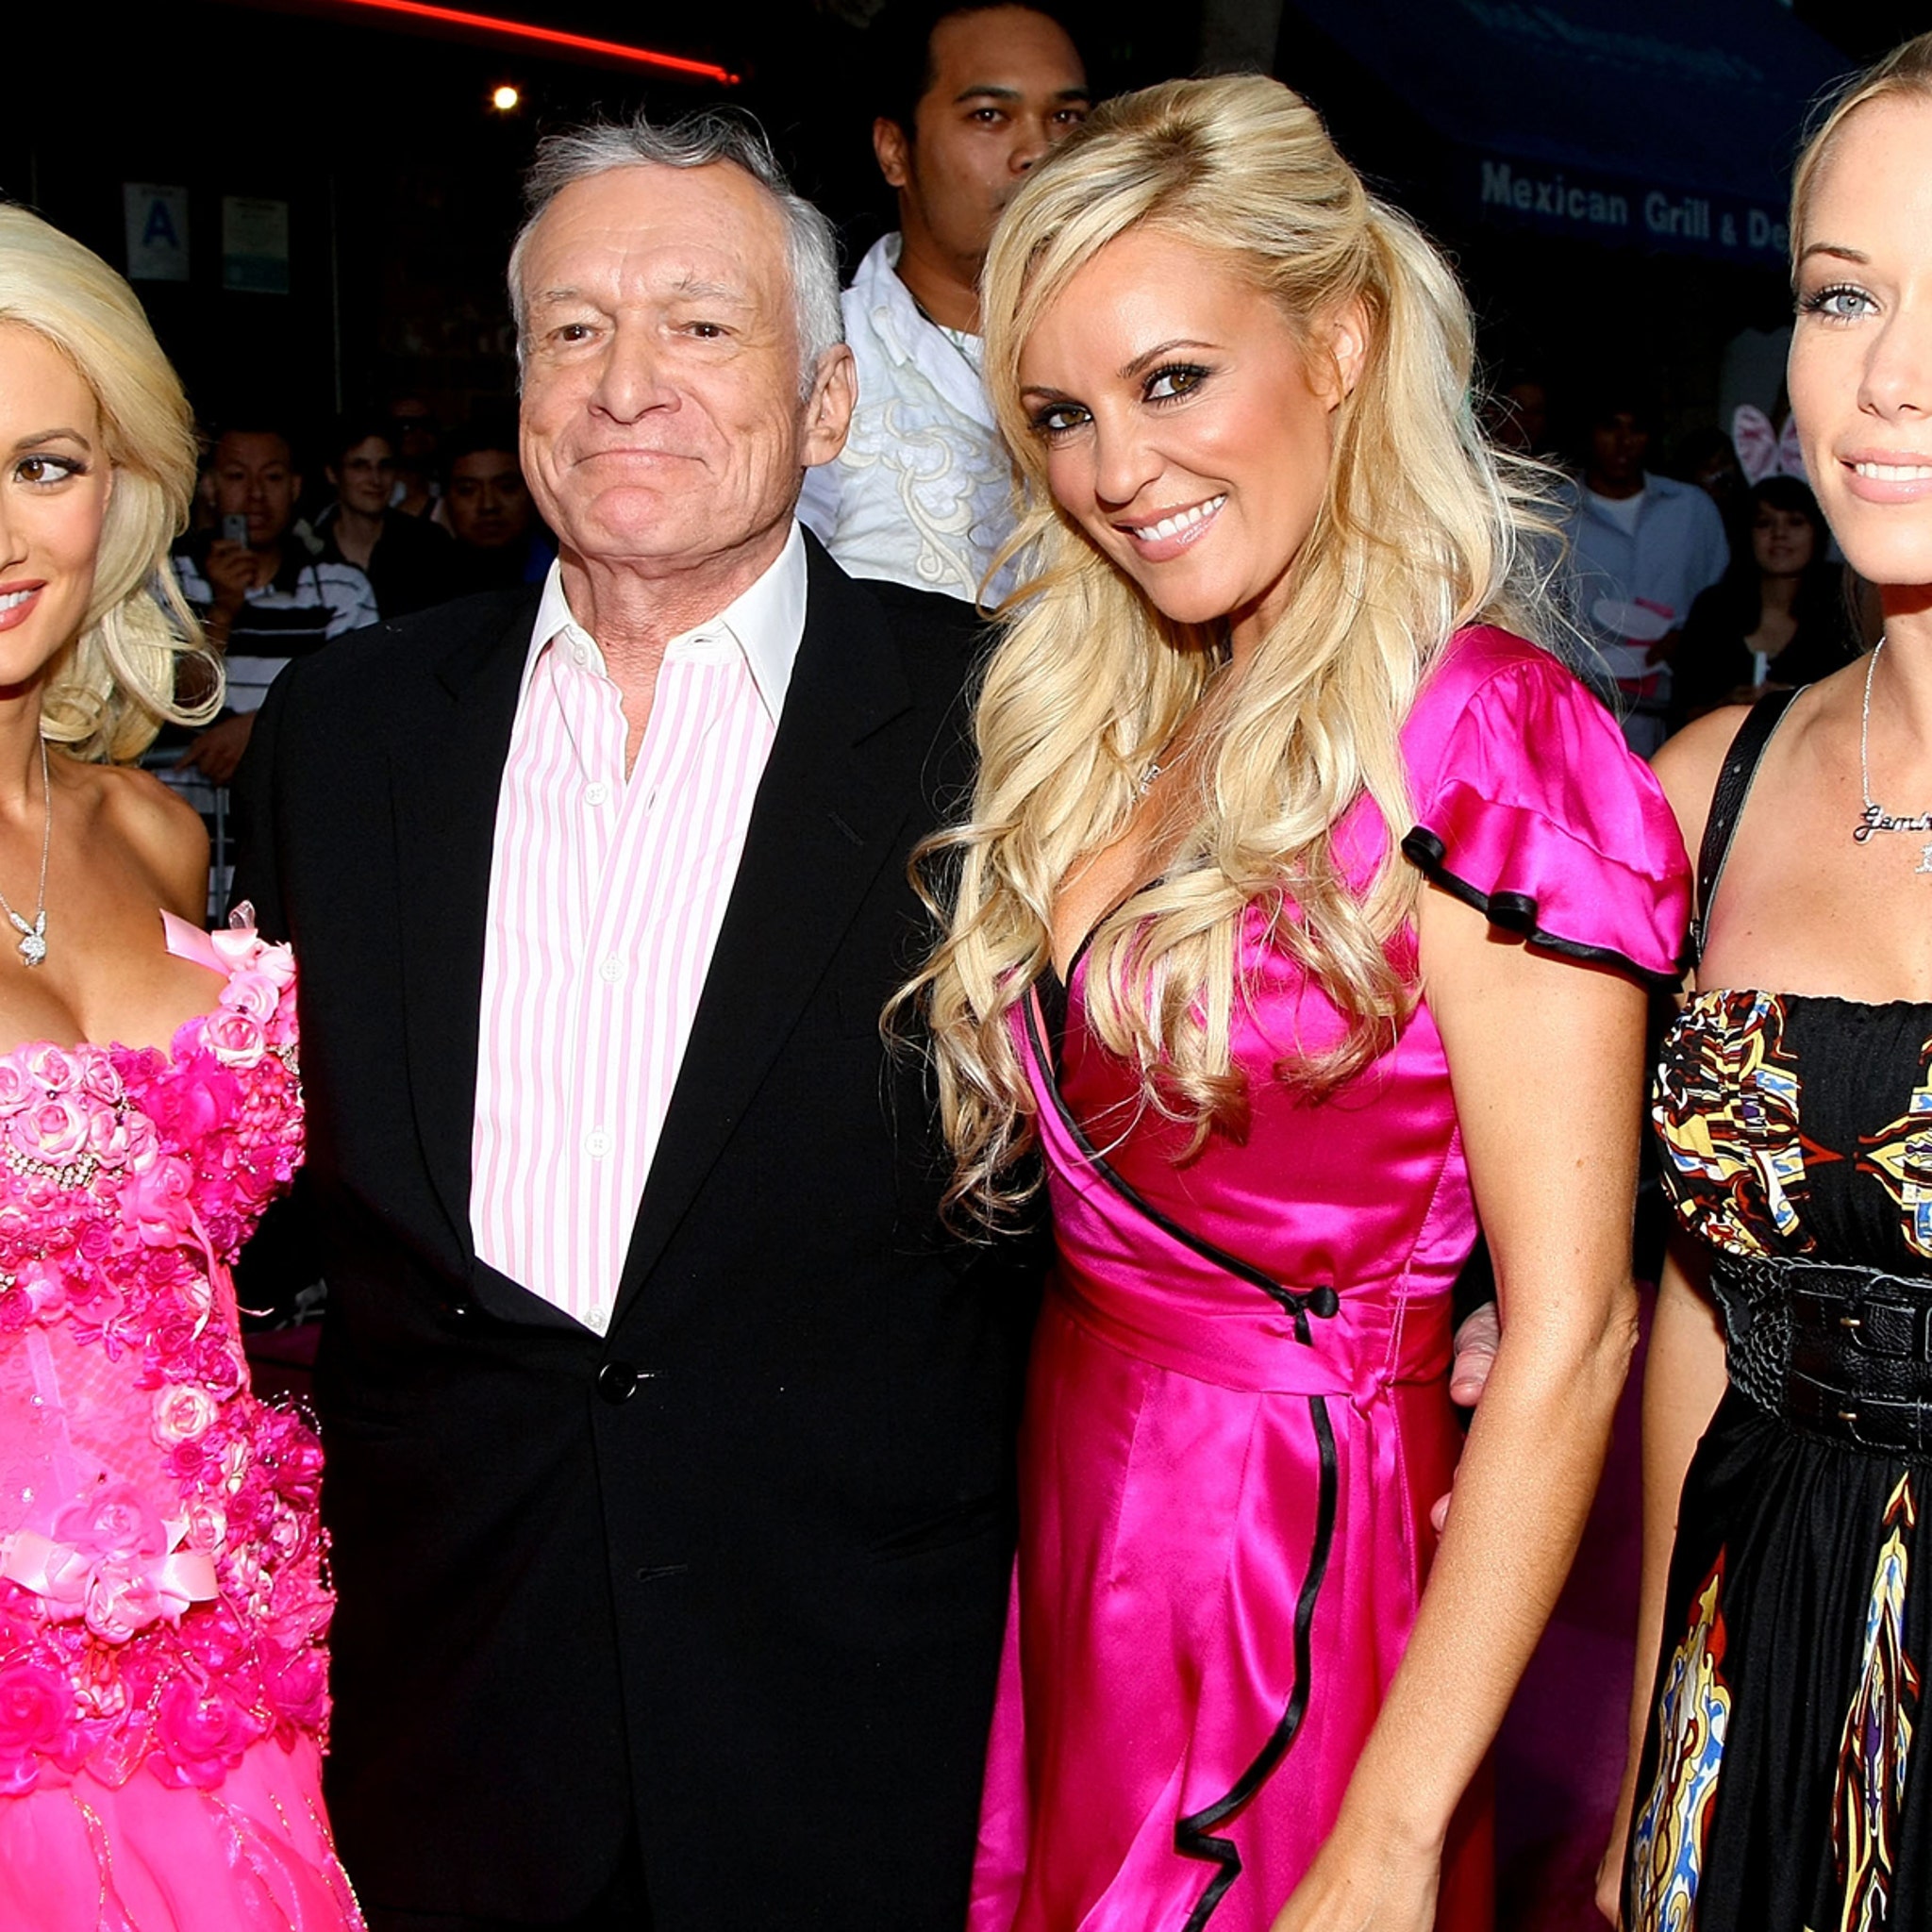 Holly Madison and Bridget Marquardt Reveal Playboy Mansion Rules and Hef's  'Manipulation' Tactics